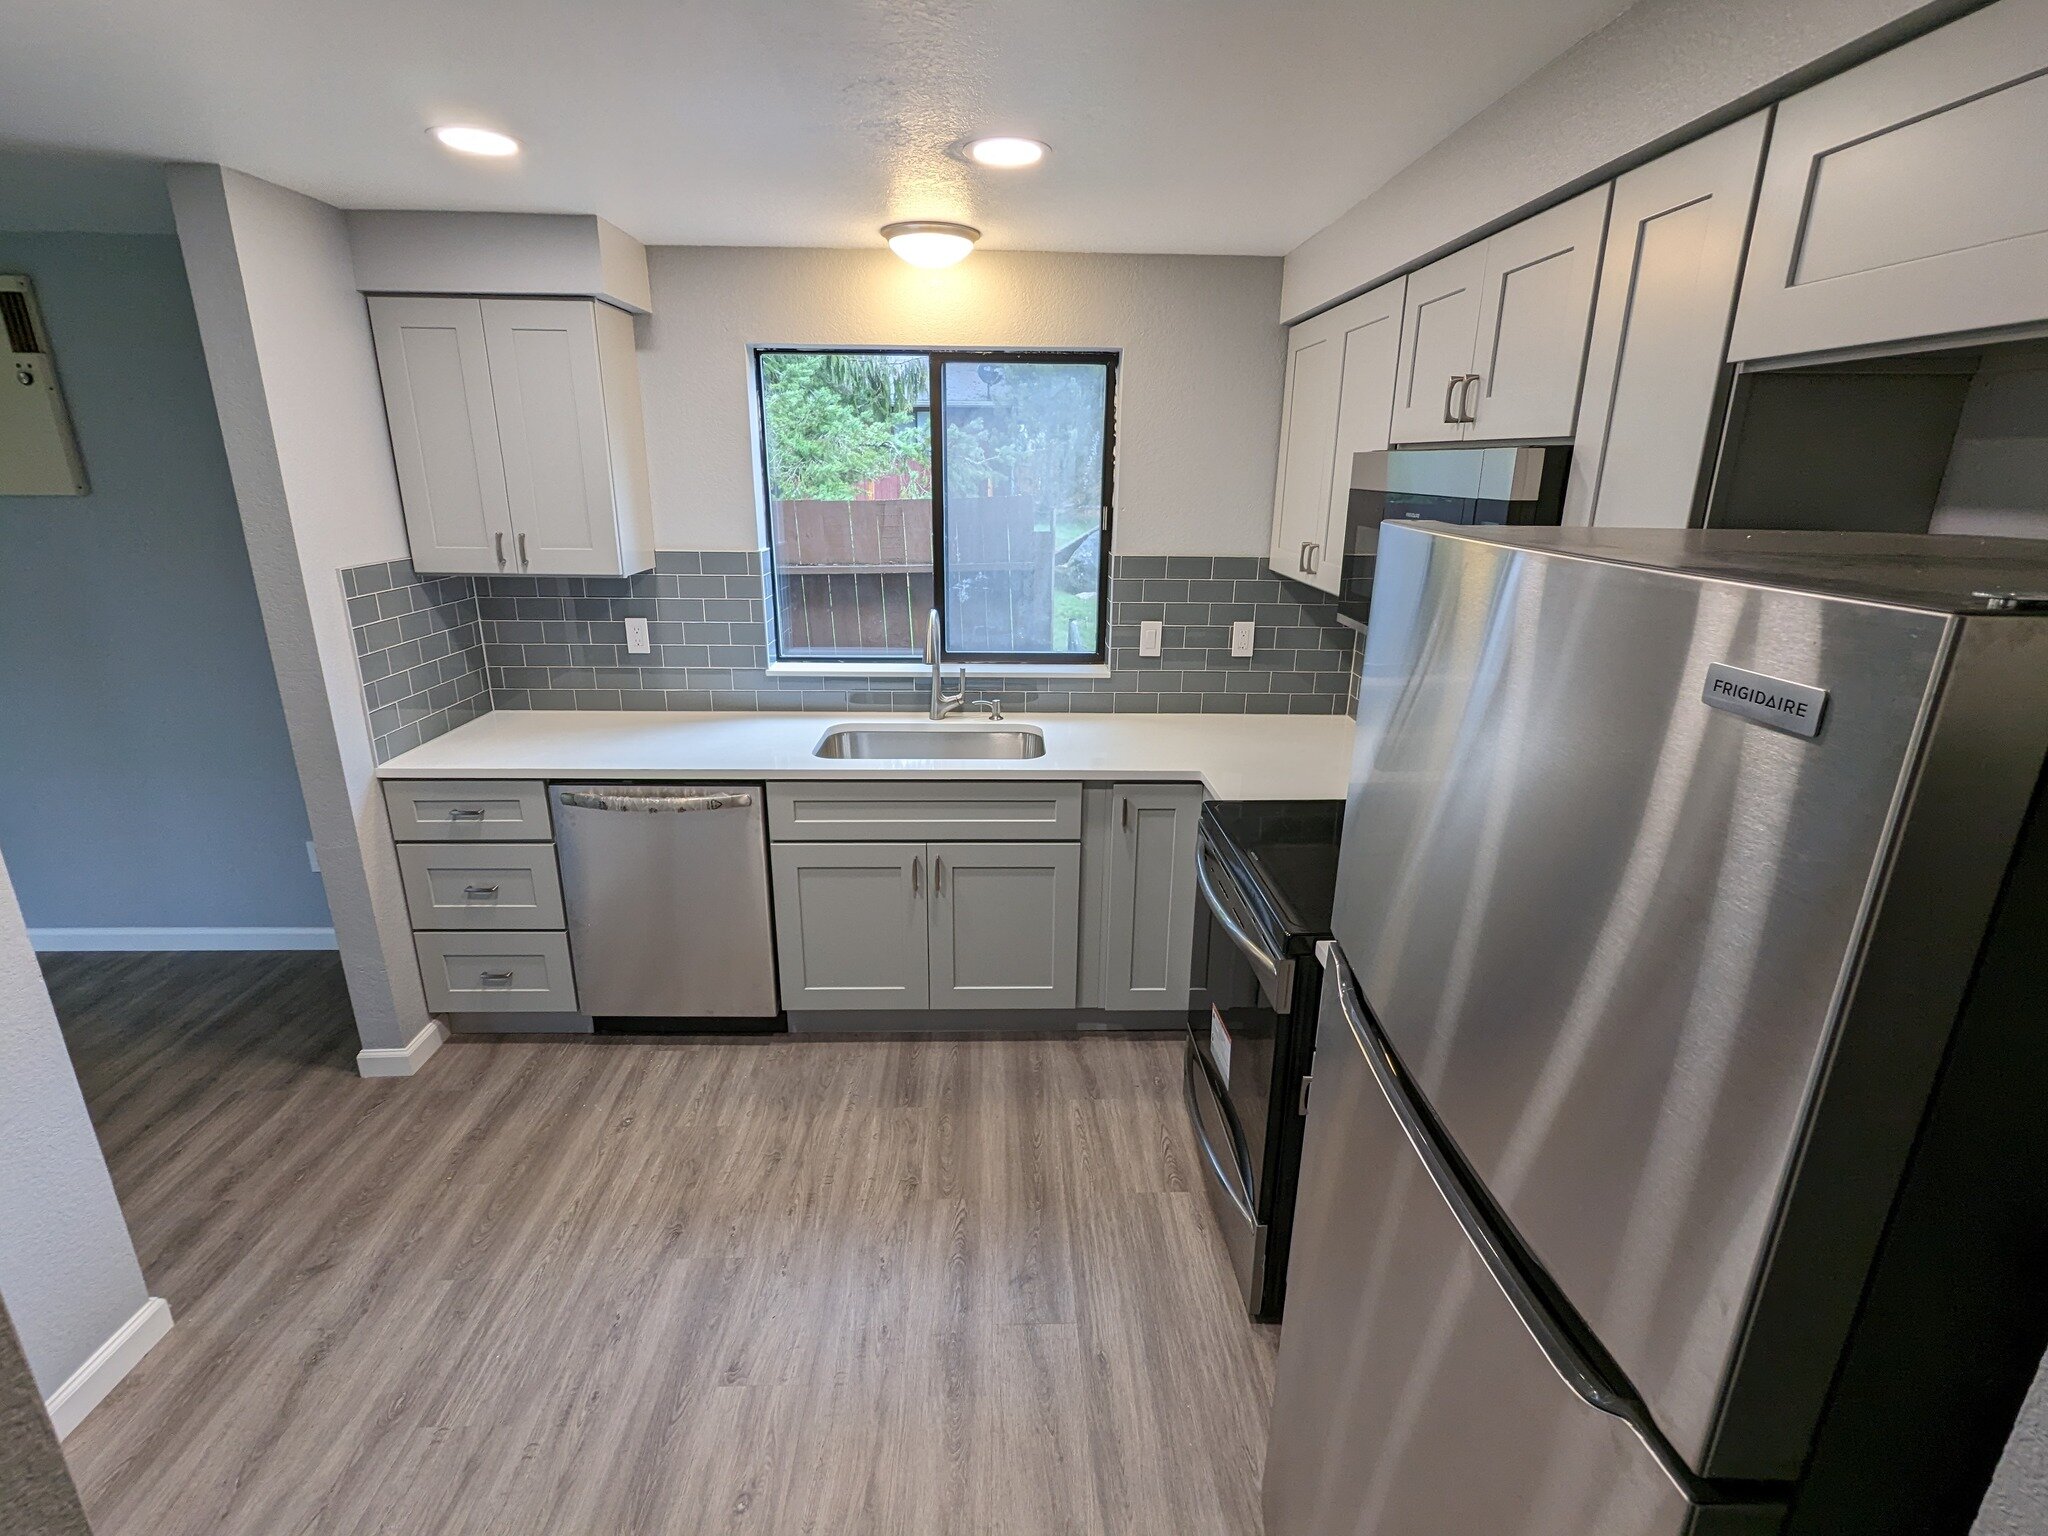 One of ours kitchen projects long days ago. 

➡️ for the before

#grandresidence #Edmonds #remodeling #kitchencabinets #kitchendesign #kitchenremodel